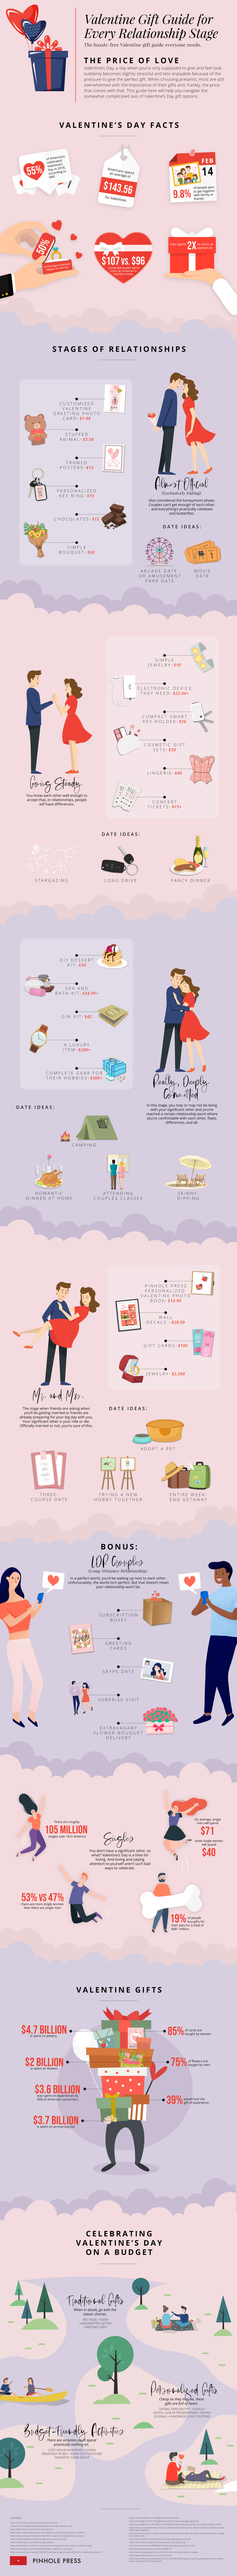 Valentine’s Day Gift and Date Ideas For Every Relationship Stage [Infographic]